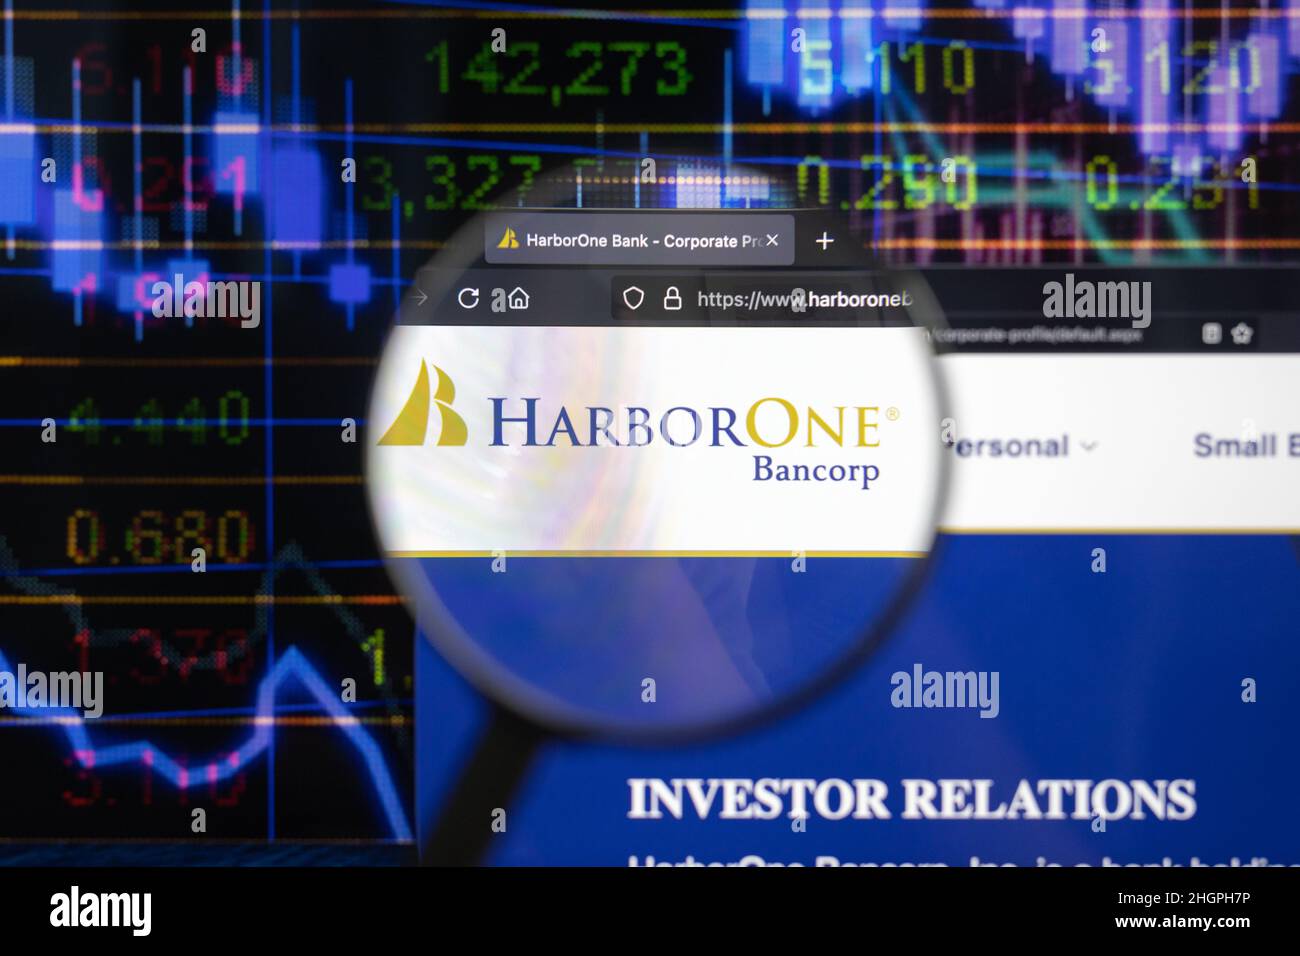 HarborOne company logo on a website with blurry stock market developments in the background, seen on a computer screen through a magnifying glass. Stock Photo